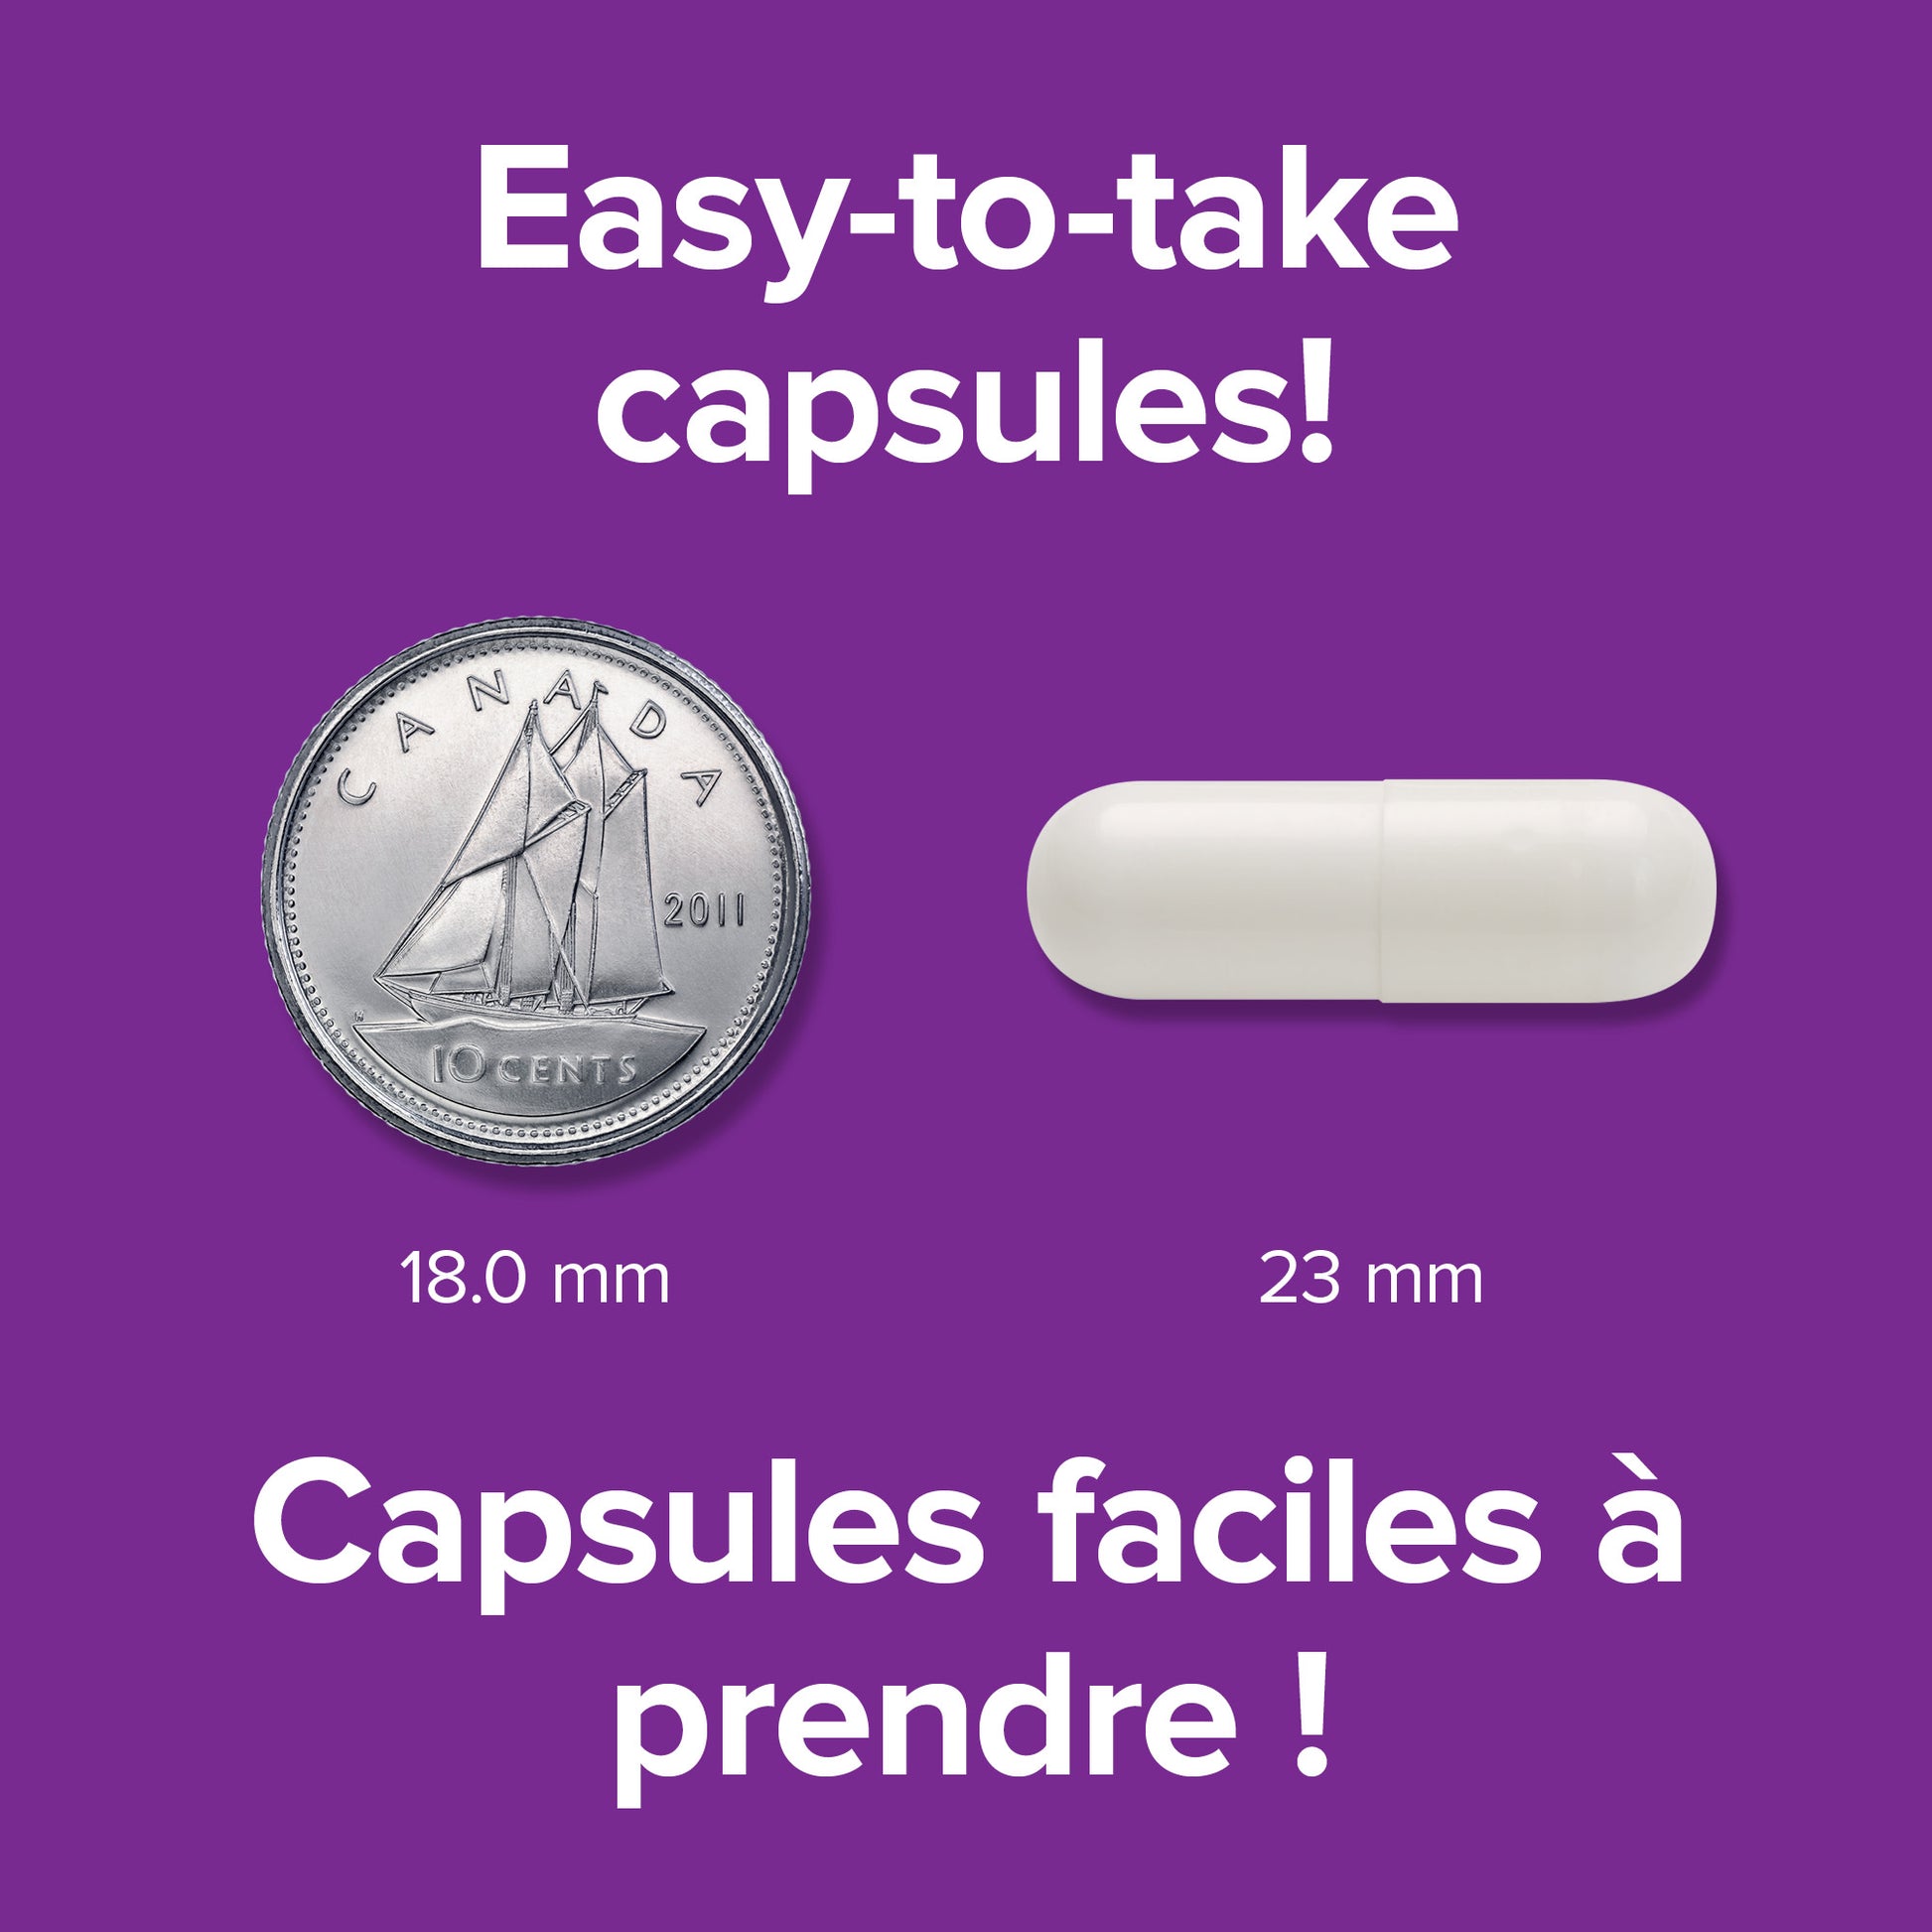 specifications-Citrate de magnésium 150 mg capsules for Webber Naturals